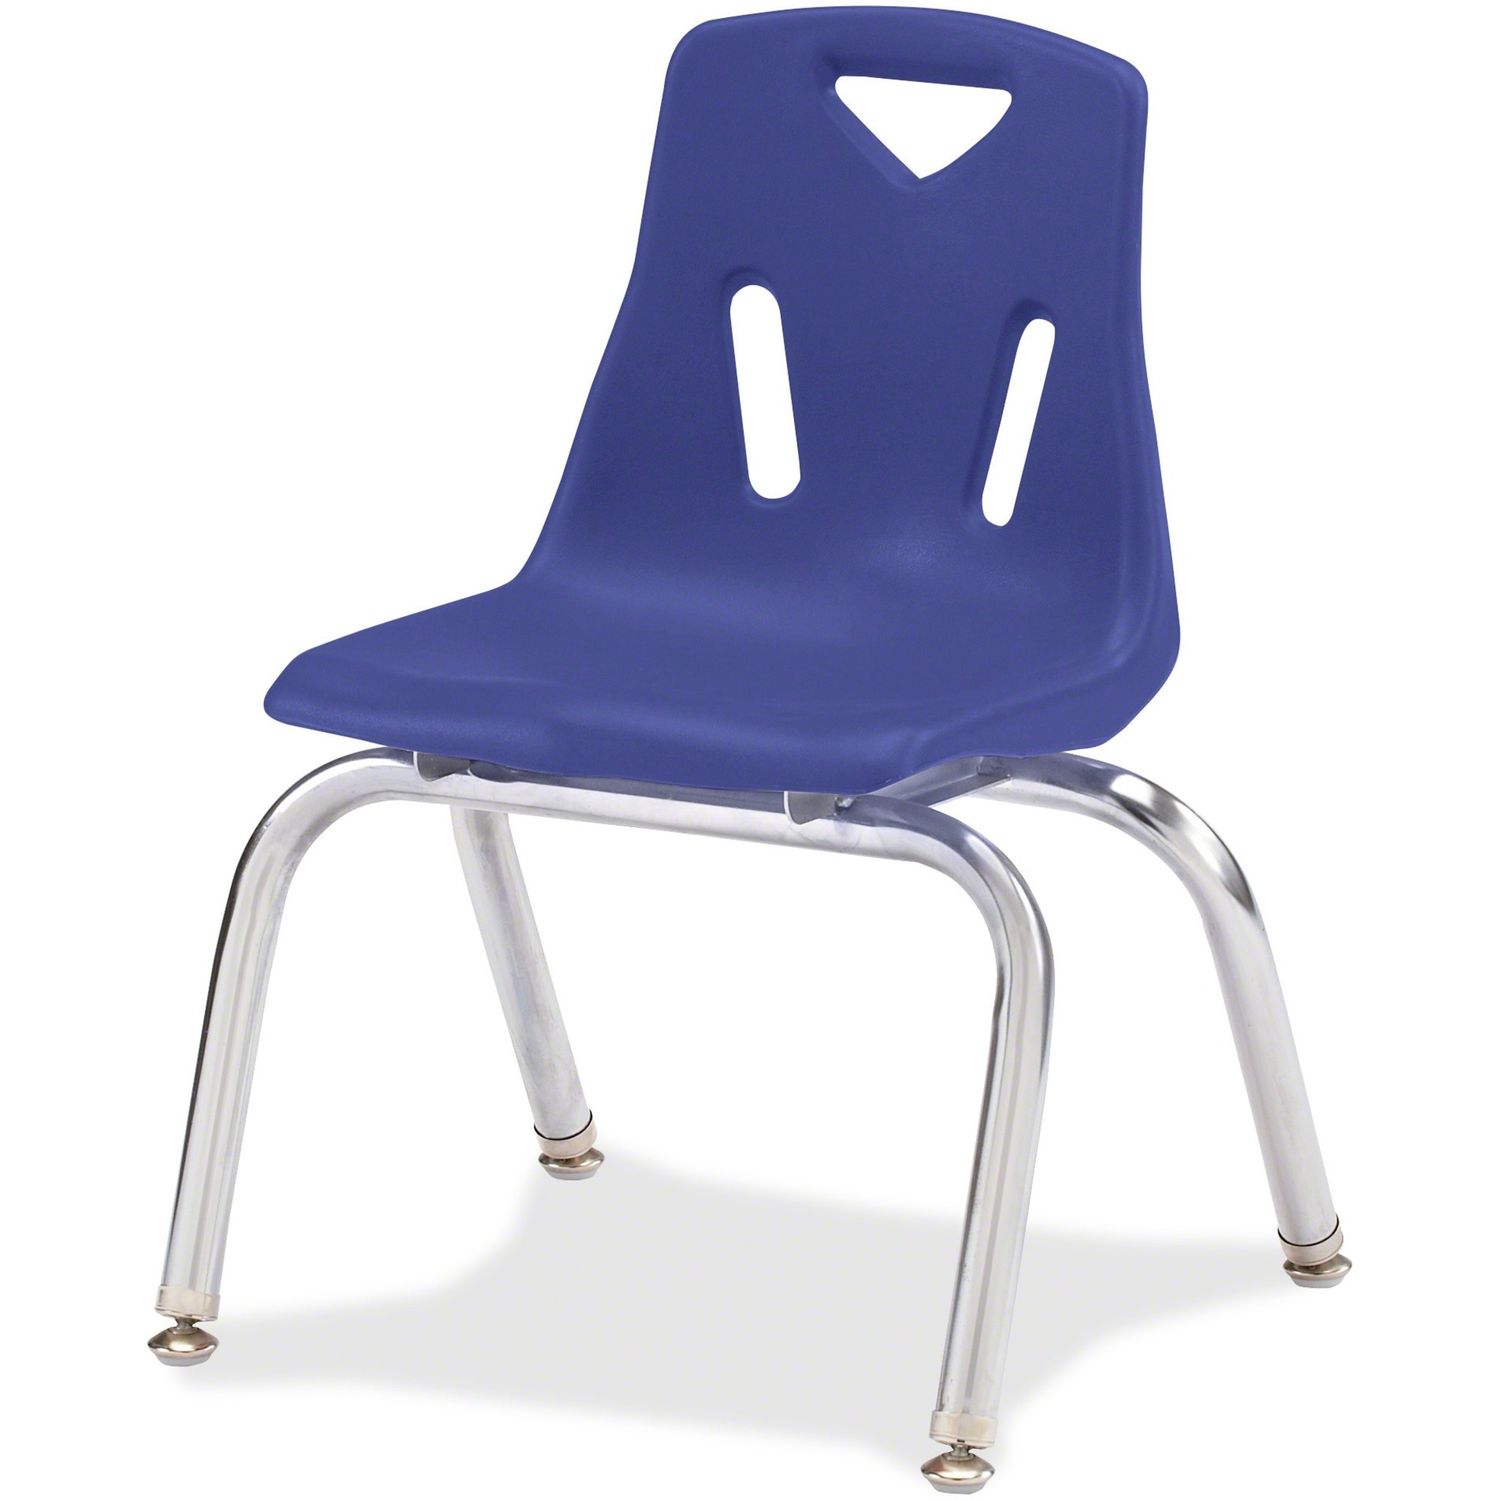 Berries Plastic Chairs with Chrome-Plated Legs Blue Polypropylene Seat, Steel Frame, Four-legged Base, Blue, 1 Each